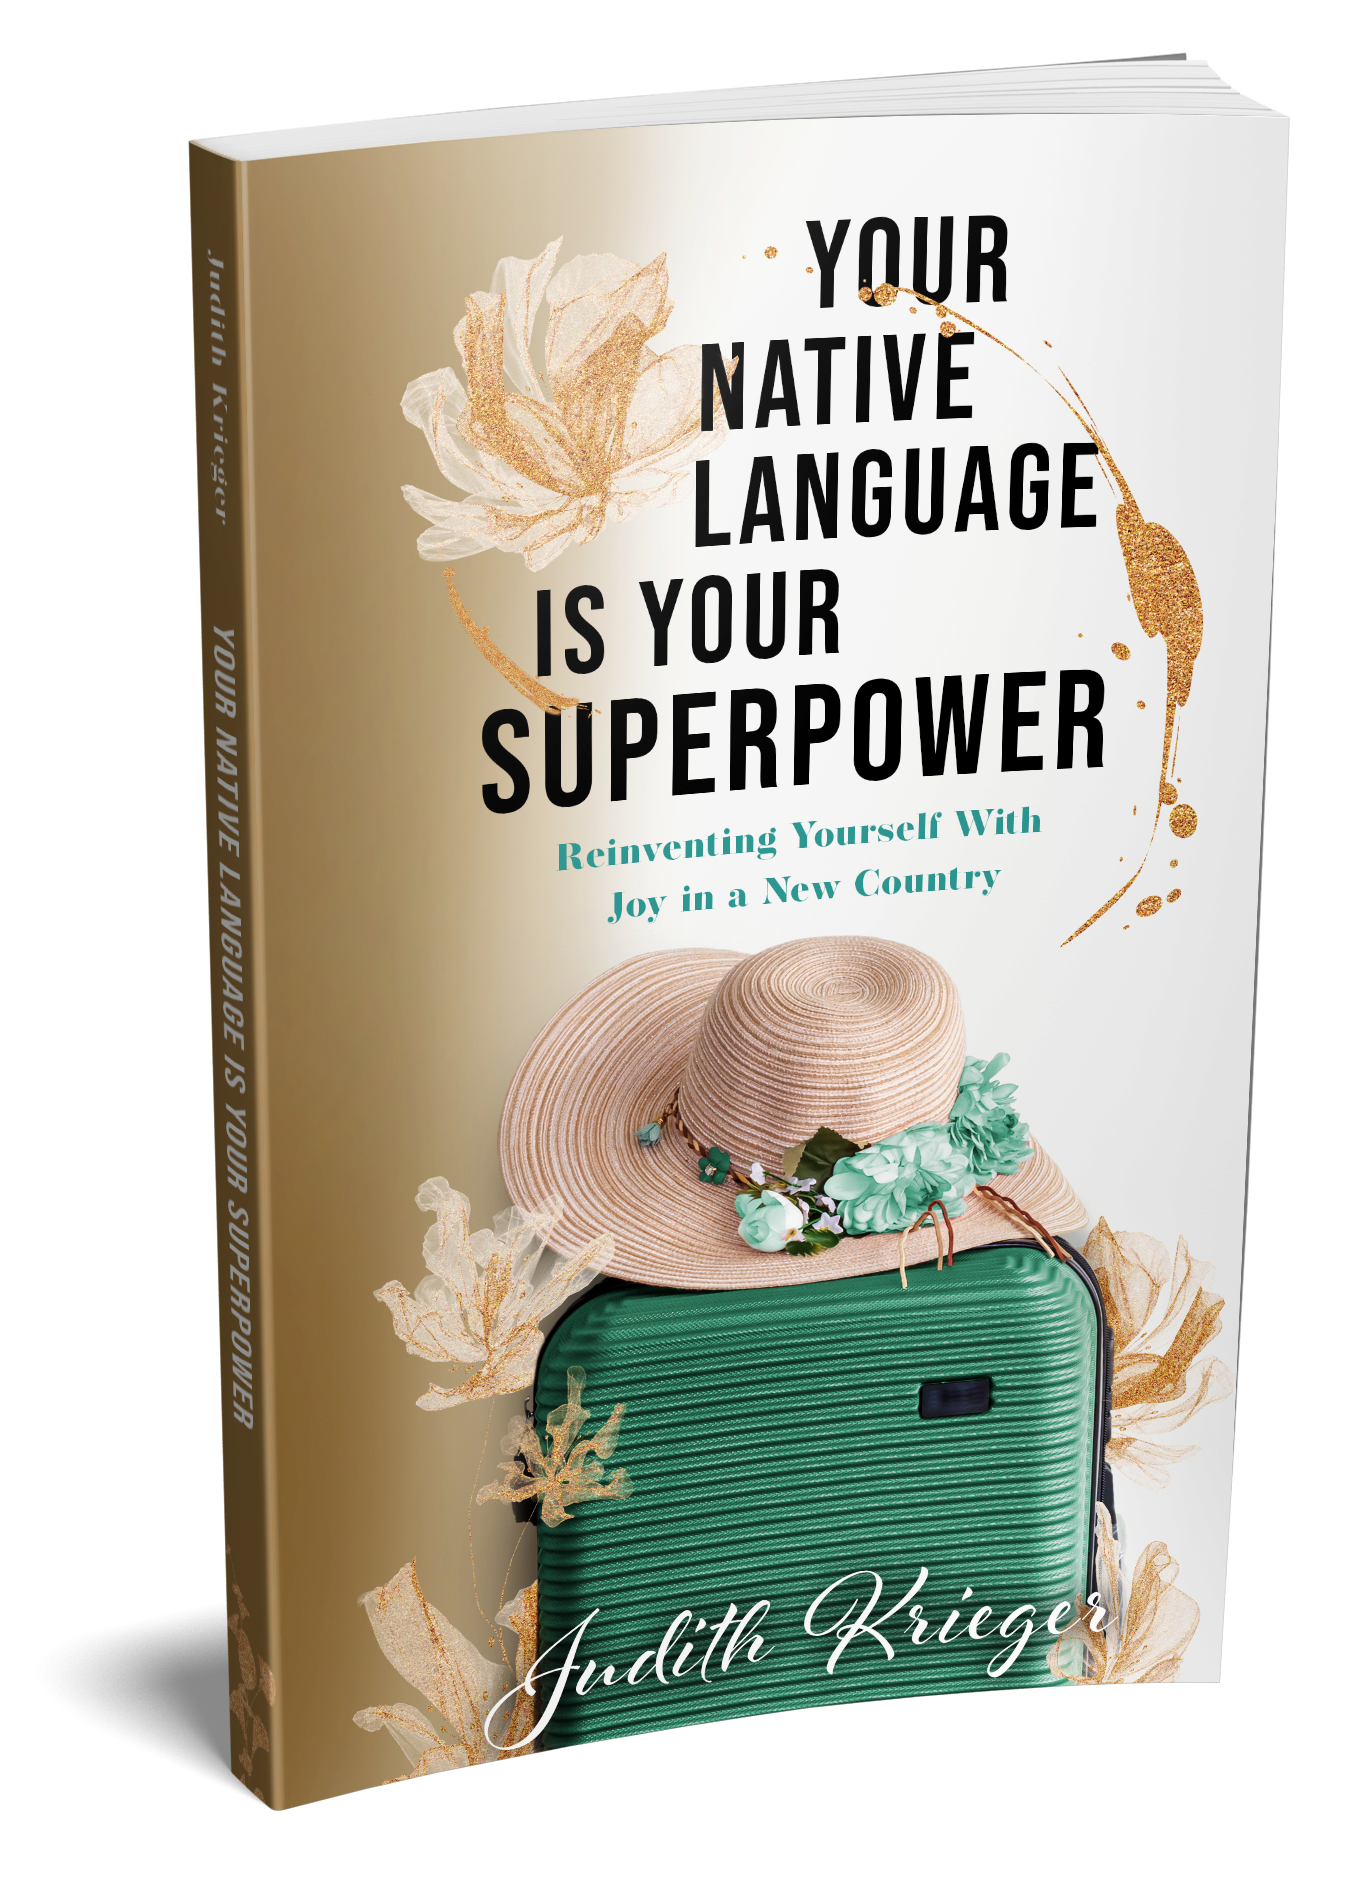 your native language is your superpower book for women immigrants image